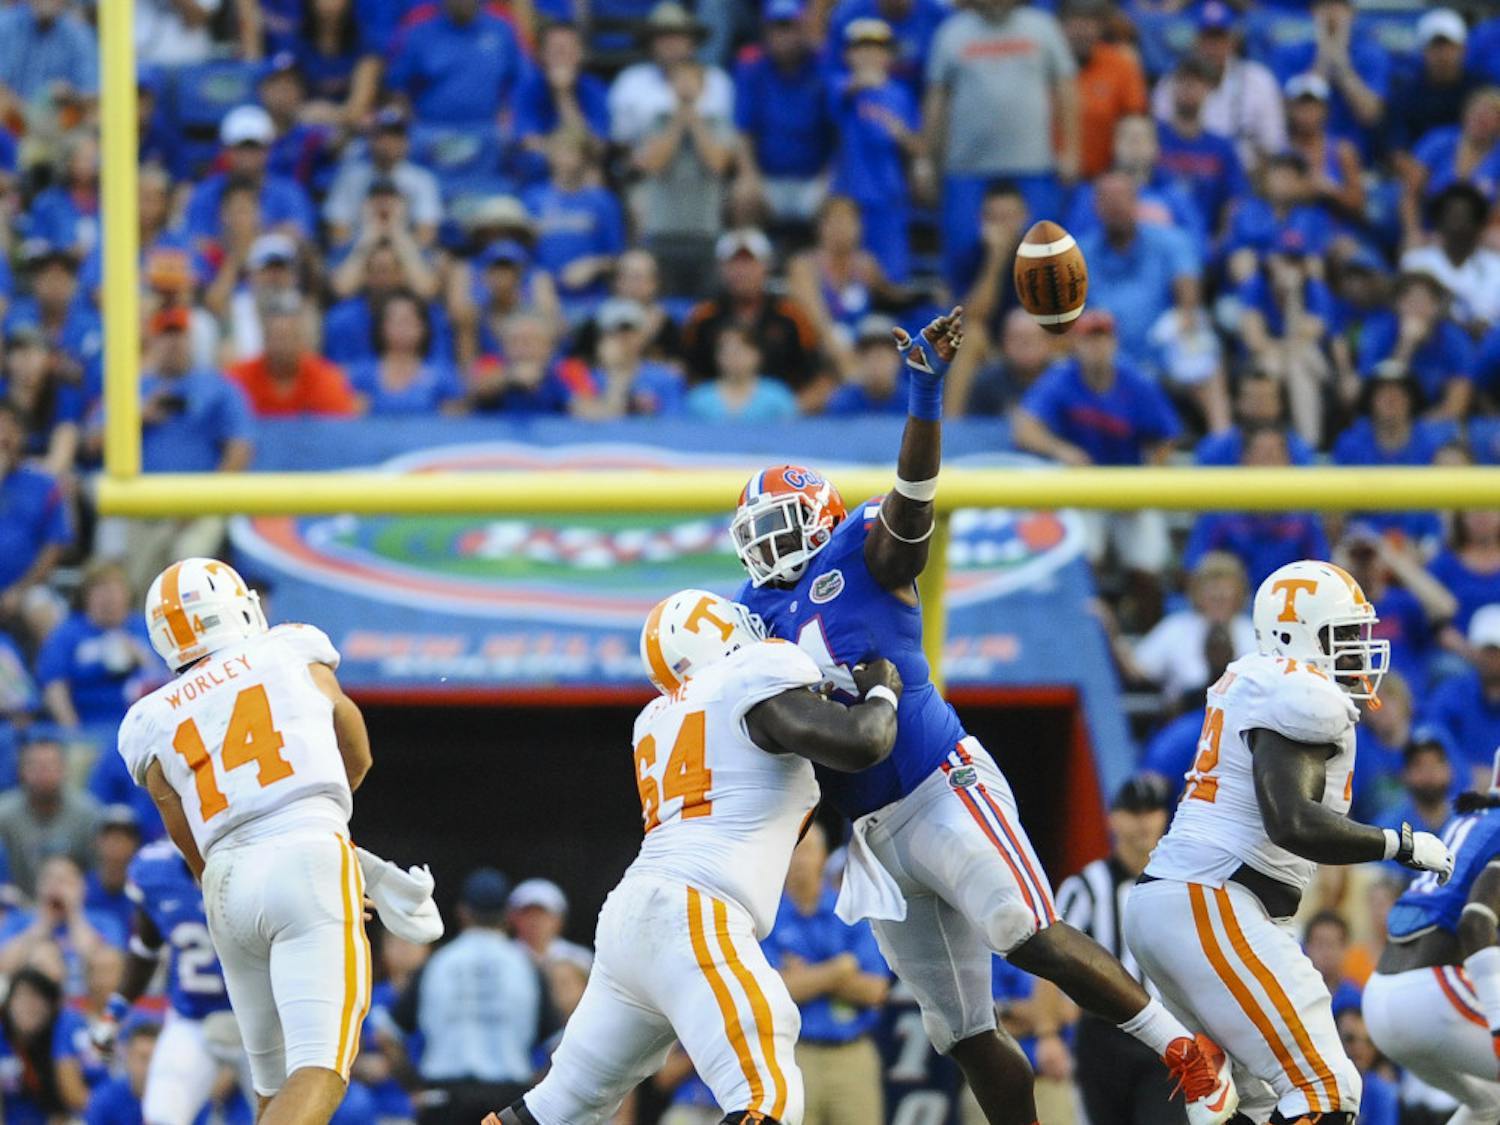 Defensive lineman Damien Jacobs bats down a pass from UT quarterback Justin Worley during Florida's 31-17 win against Tennessee on Saturday in Ben Hill Griffin Stadium.